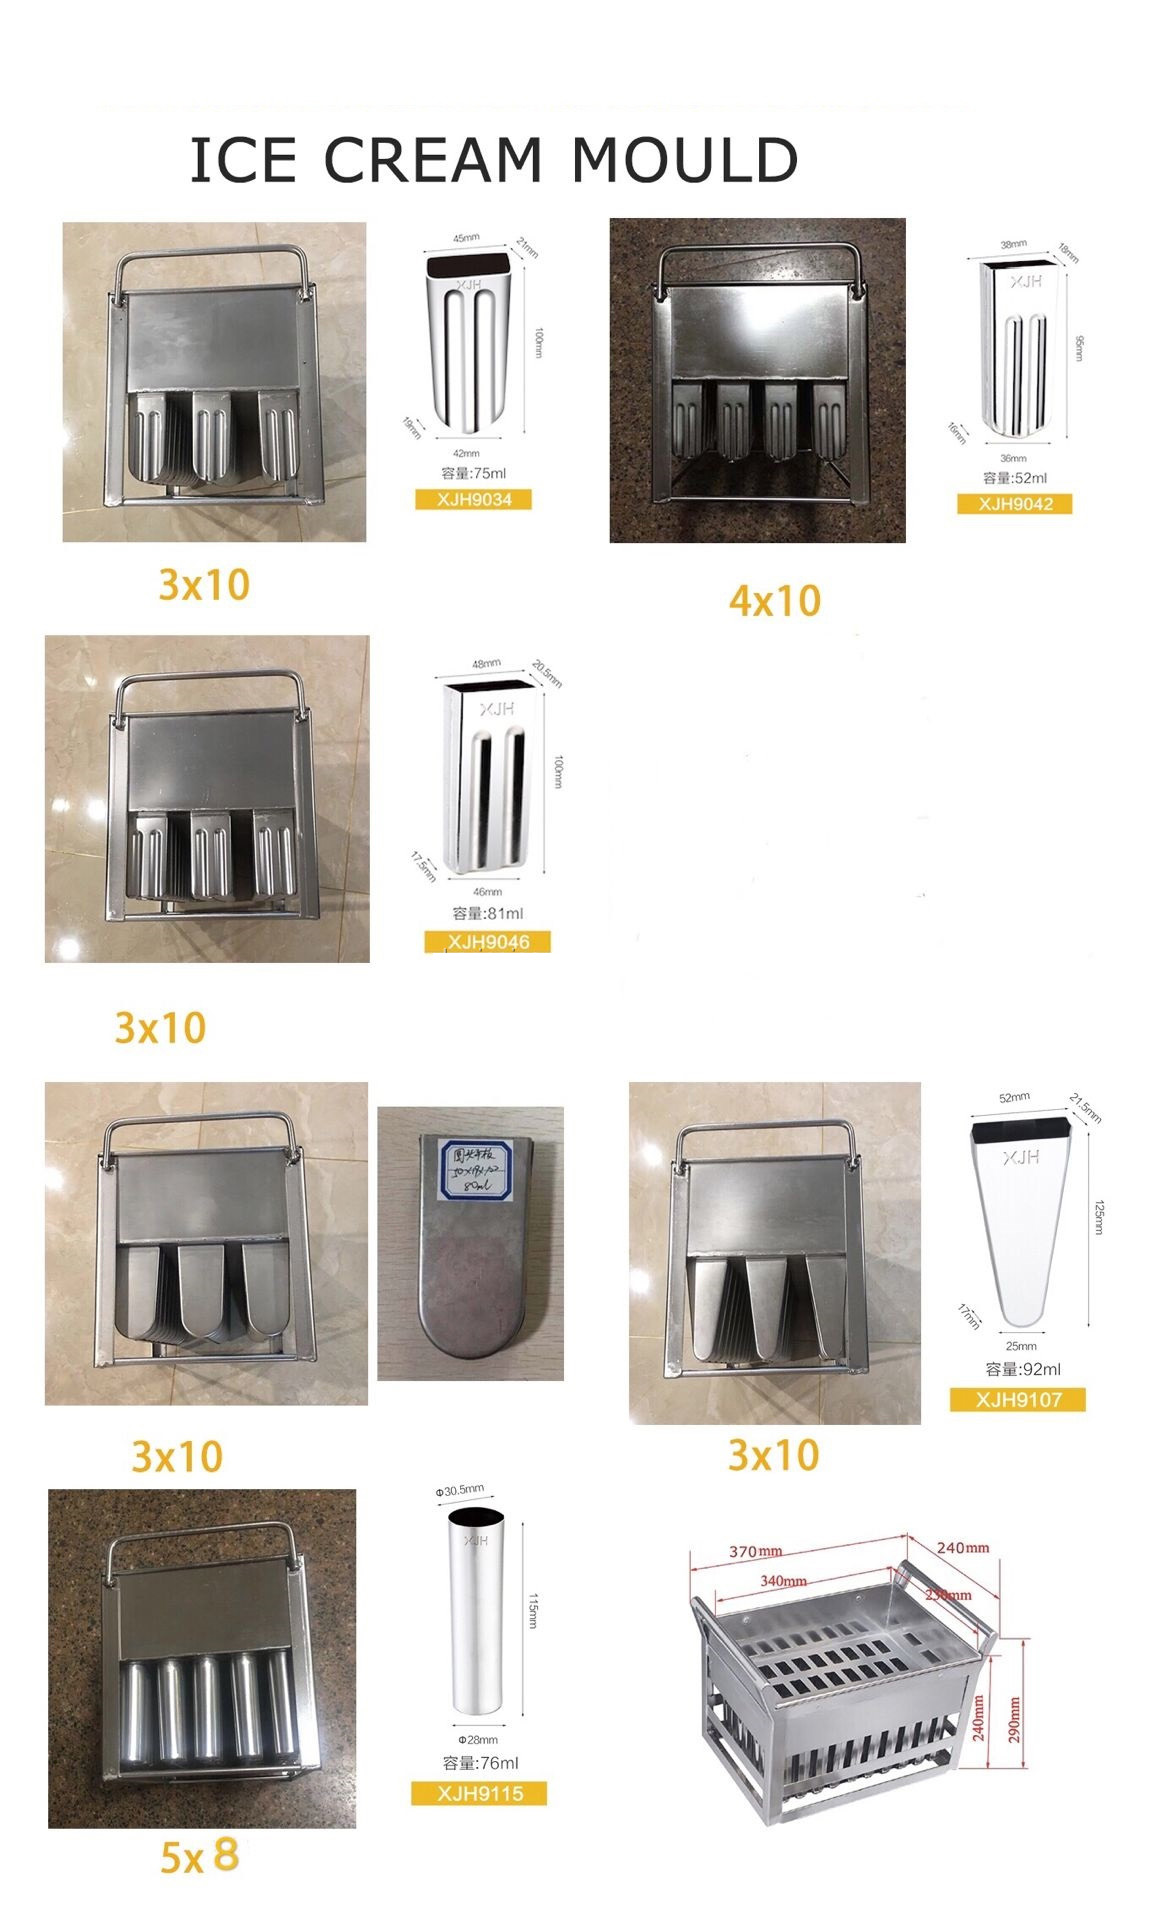 Commercial High Quality Low Price 6 Moulds Popsicle Machine / Ice Lolly Machine / Popsicle maker - Popsicle Machine - 6